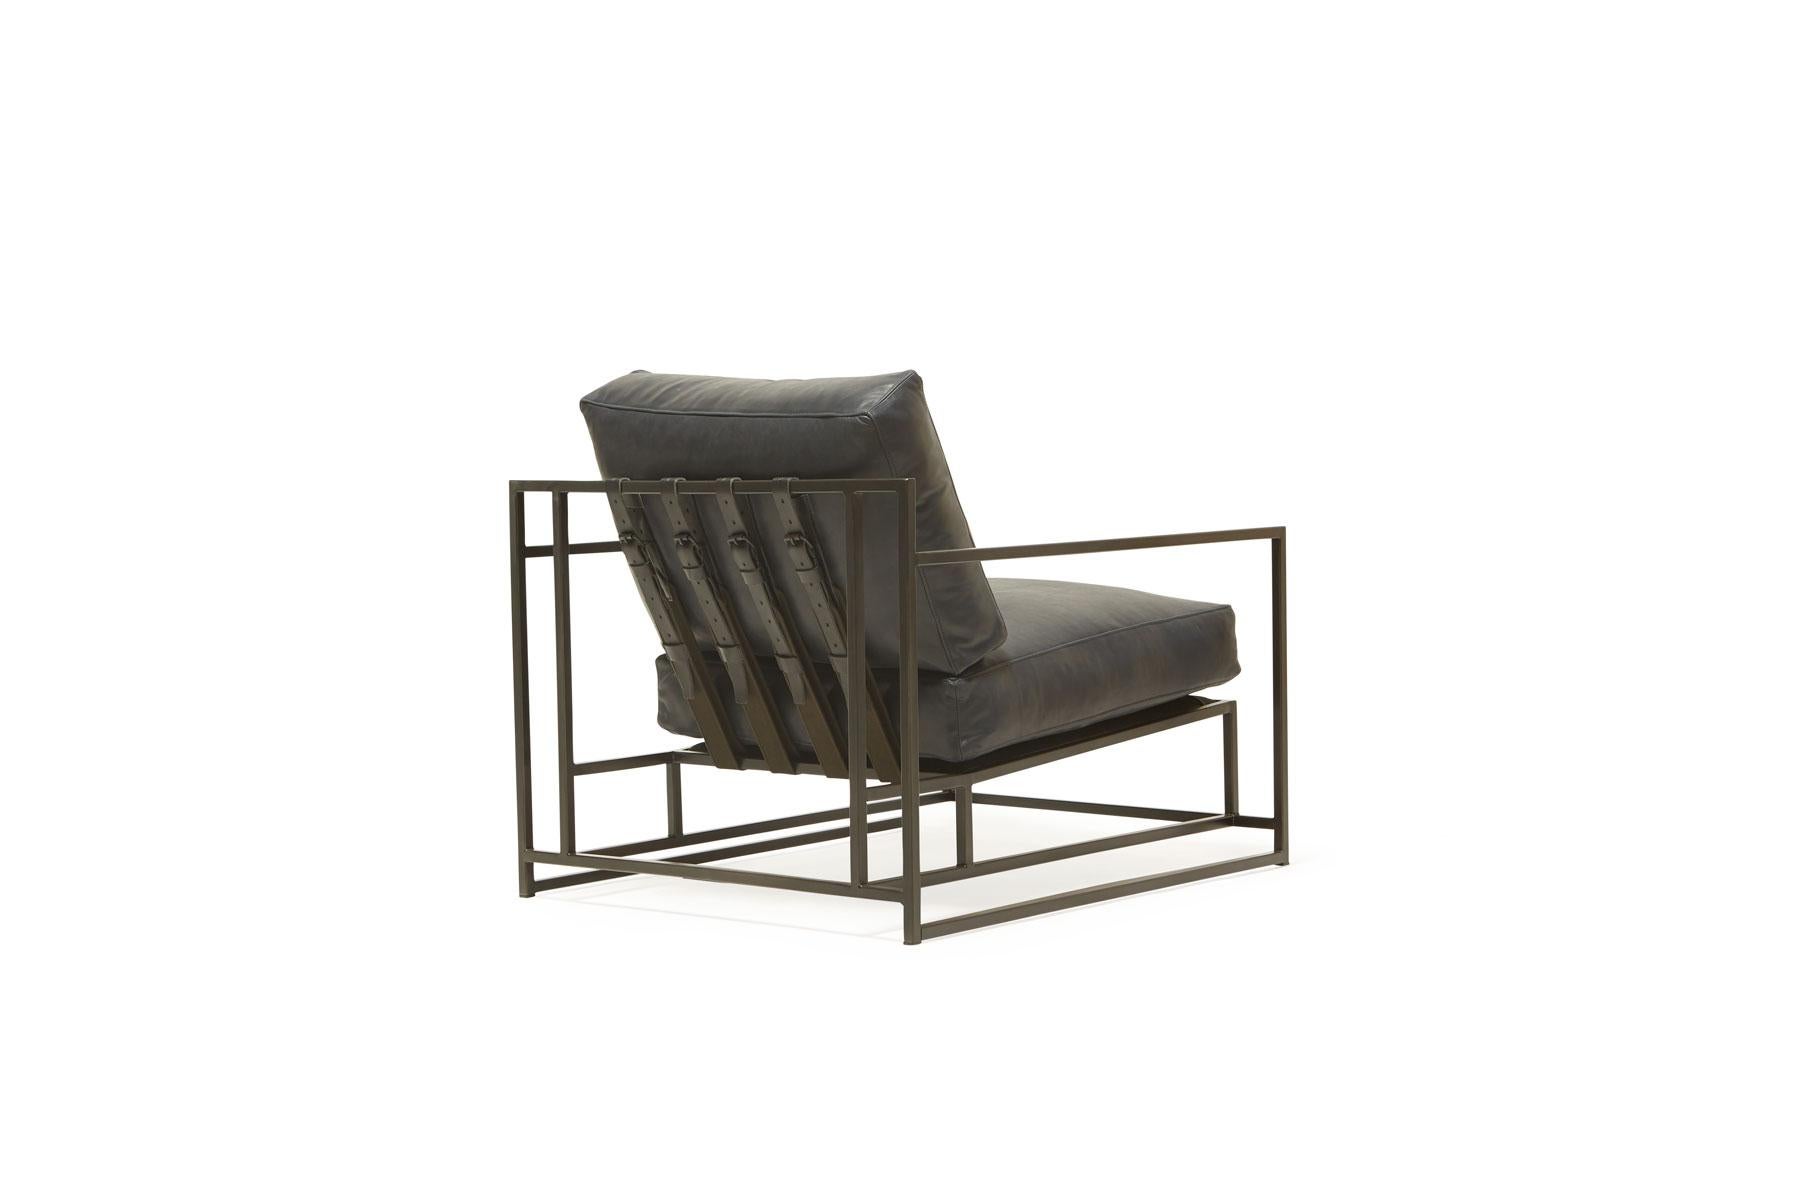 American Providence Blue Smoke Leather and Blackened Steel Armchair V2 For Sale